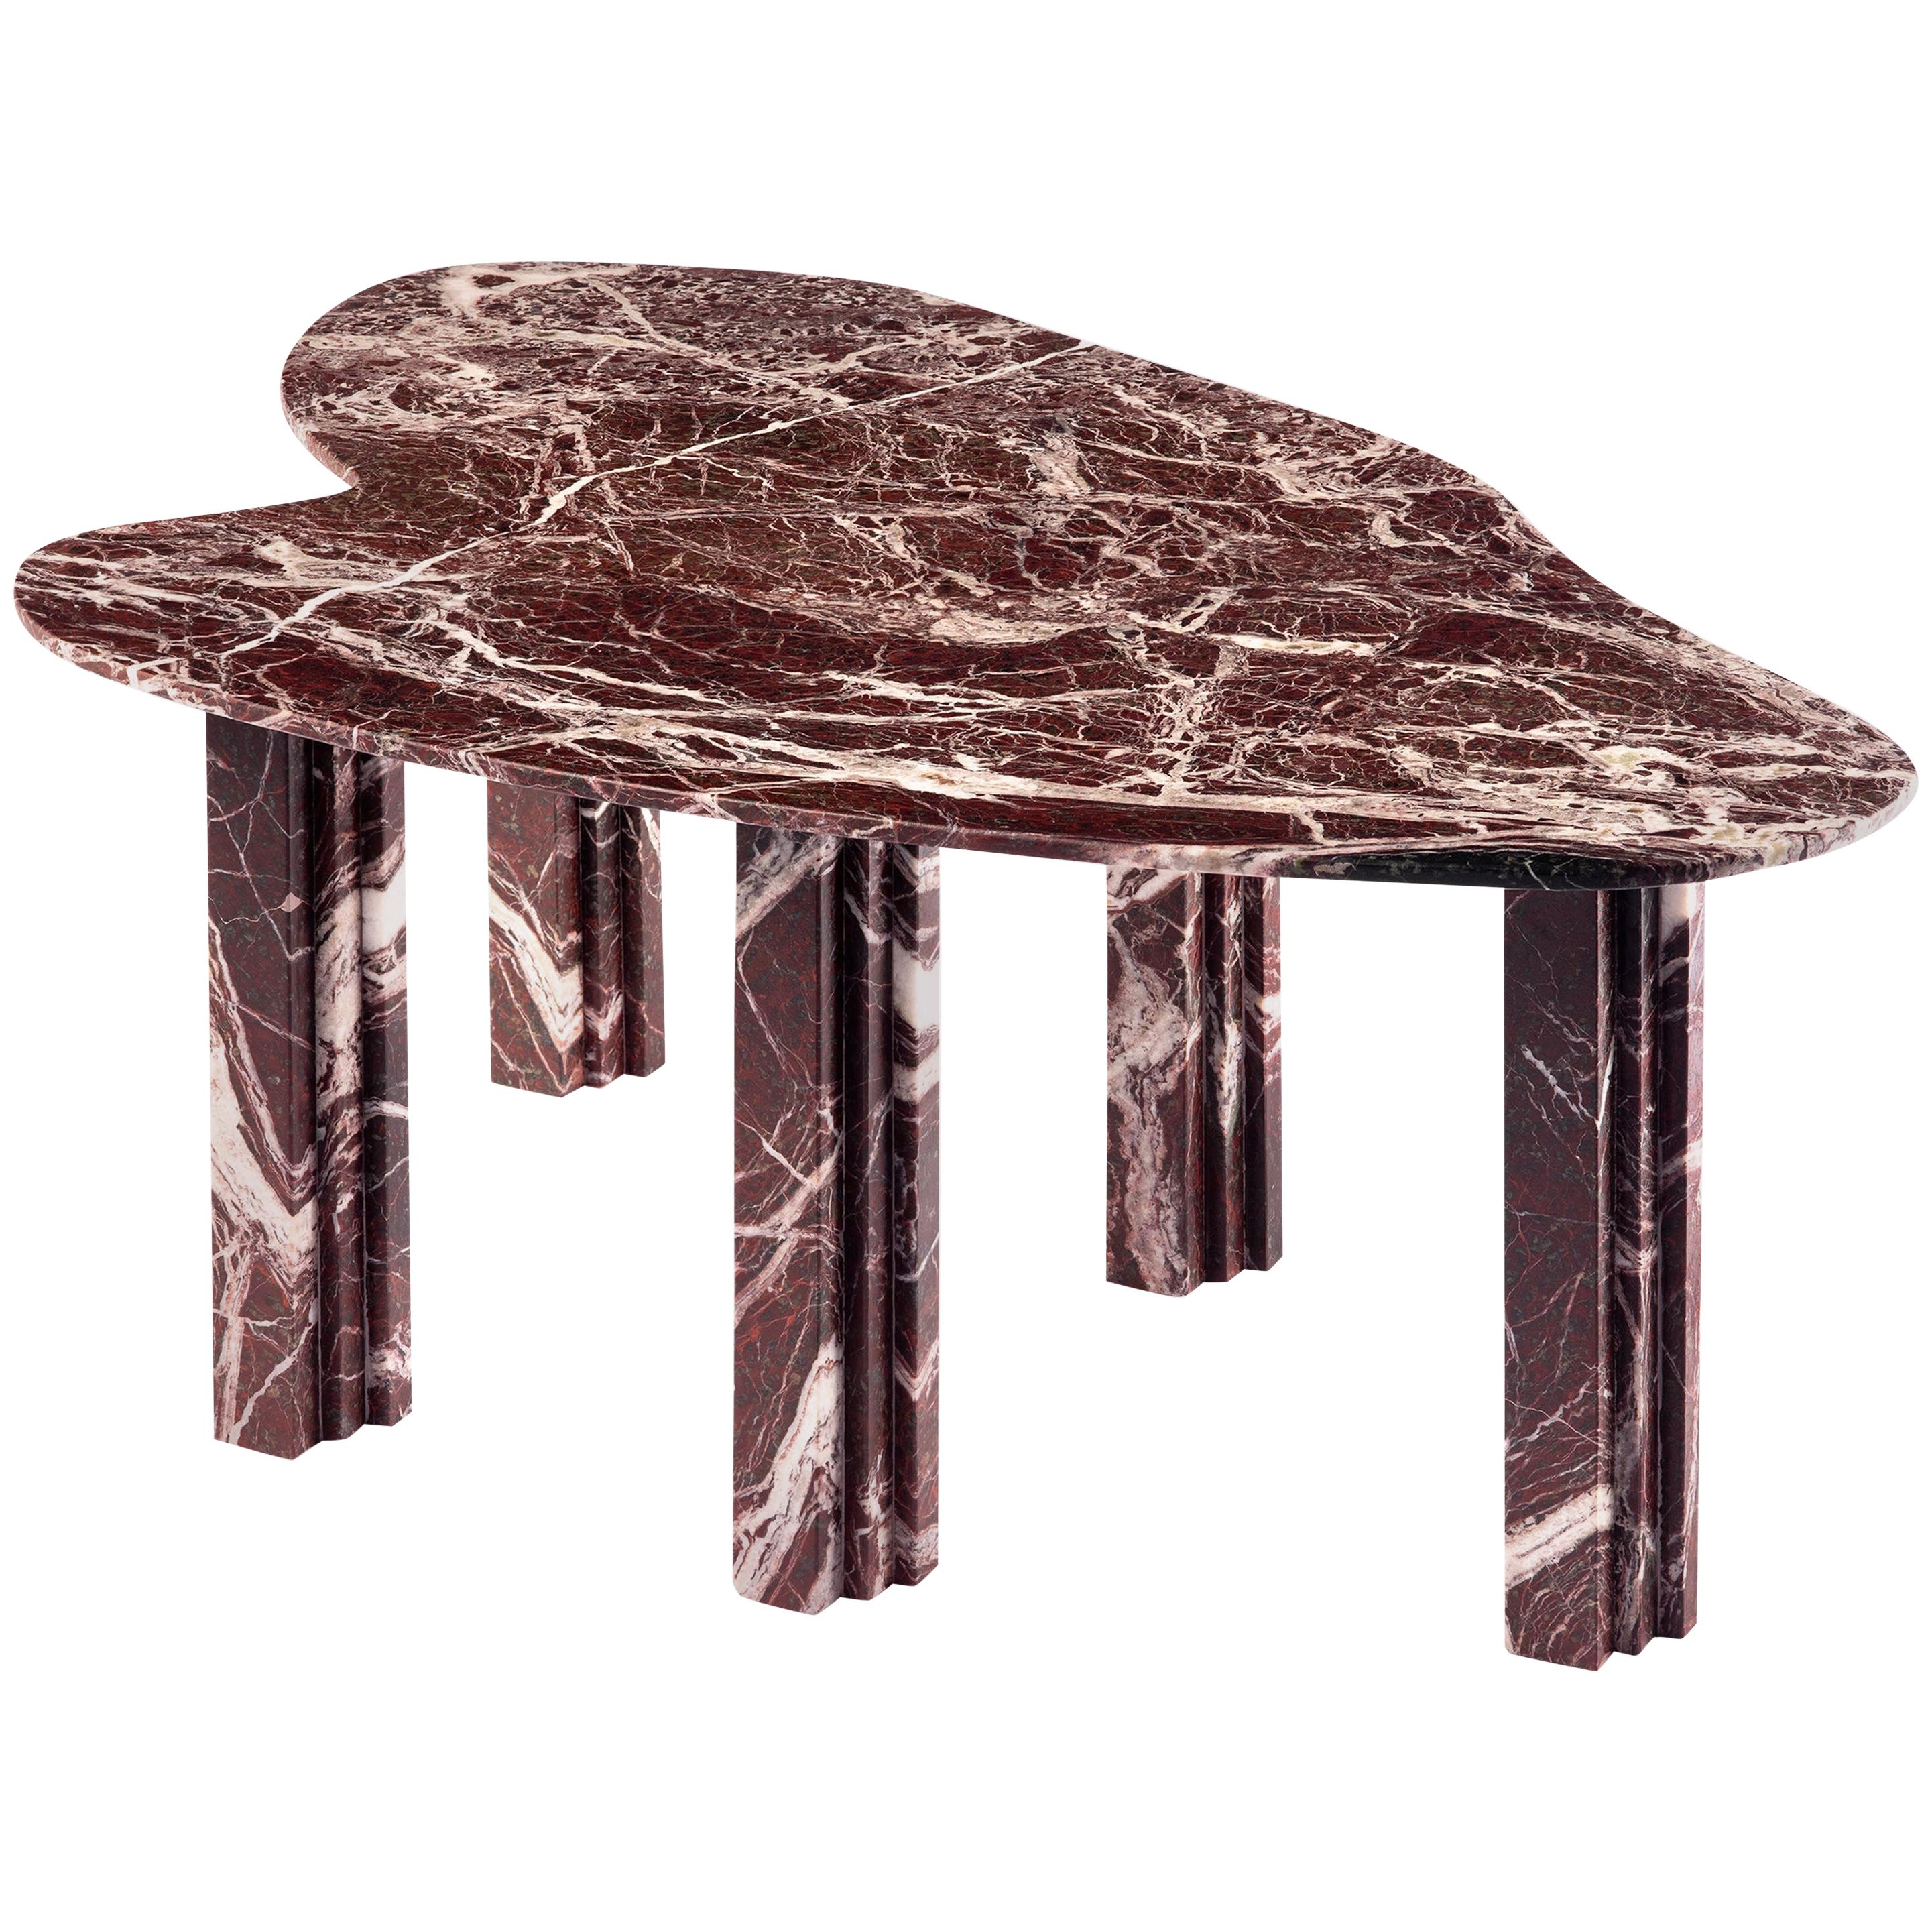 Sculptural red marble dining table signed by Lorenzo Bini
Title: She said
Measures: 95 x 63 x H 37 cm
Material: Rosso levanto

Also available as a dining table 190 x 125 x H 73.5 cm
   


Six tableaux is a series of marble tables designed by Lorenzo